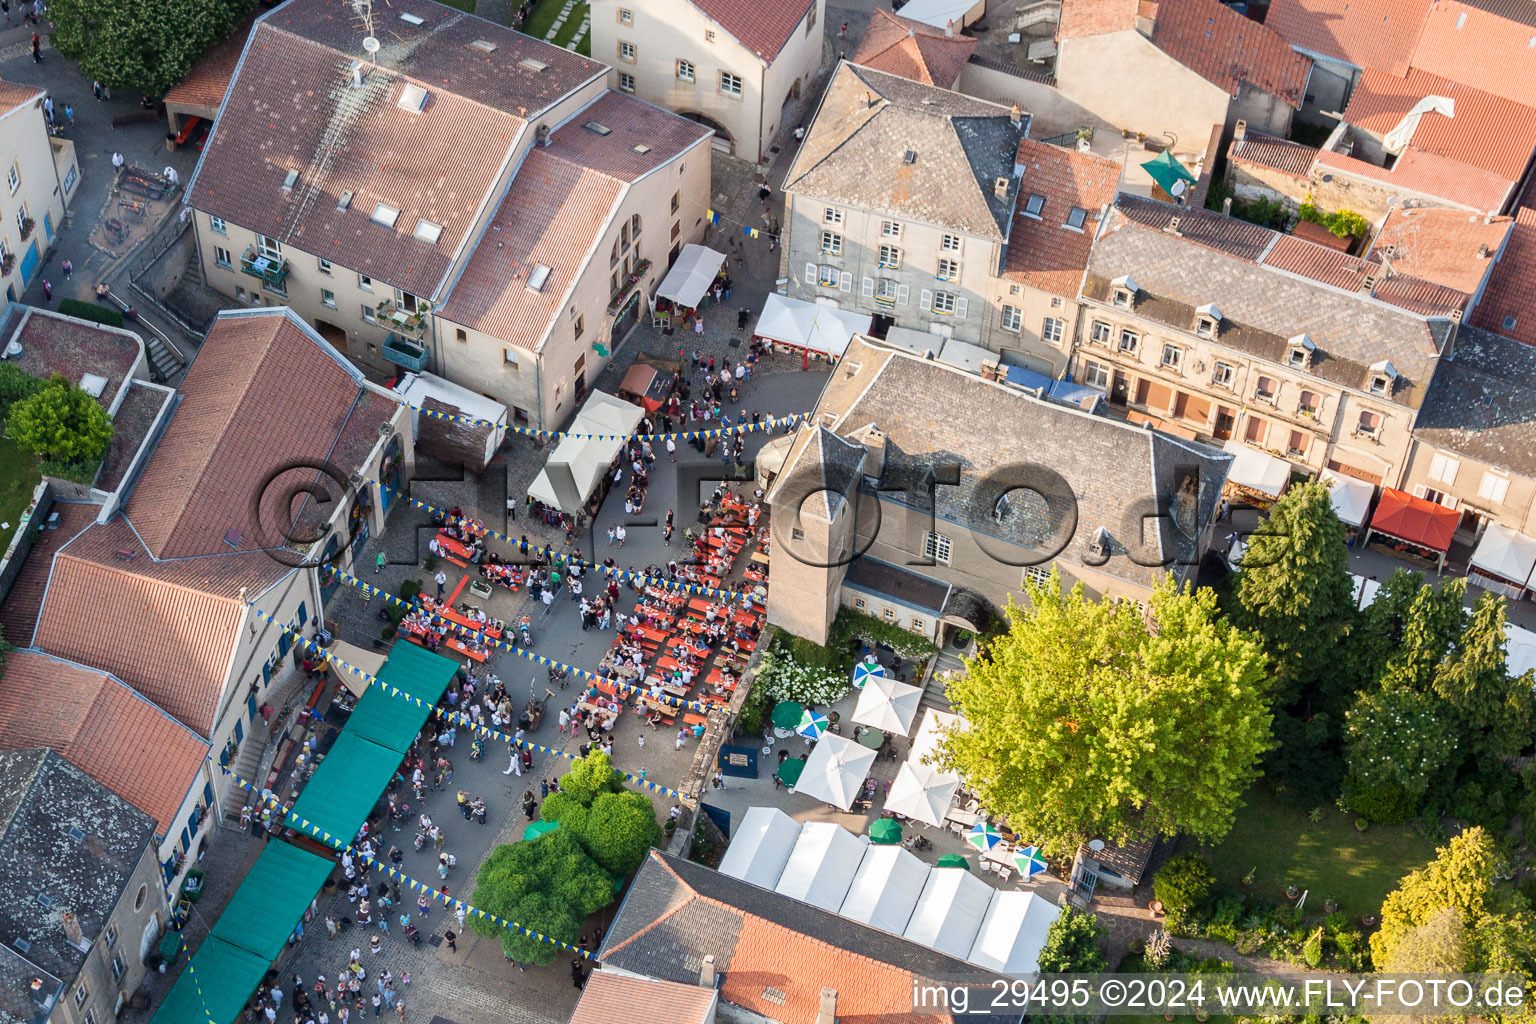 Aerial photograpy of Medieval market at Rodemack in Grand Est, France